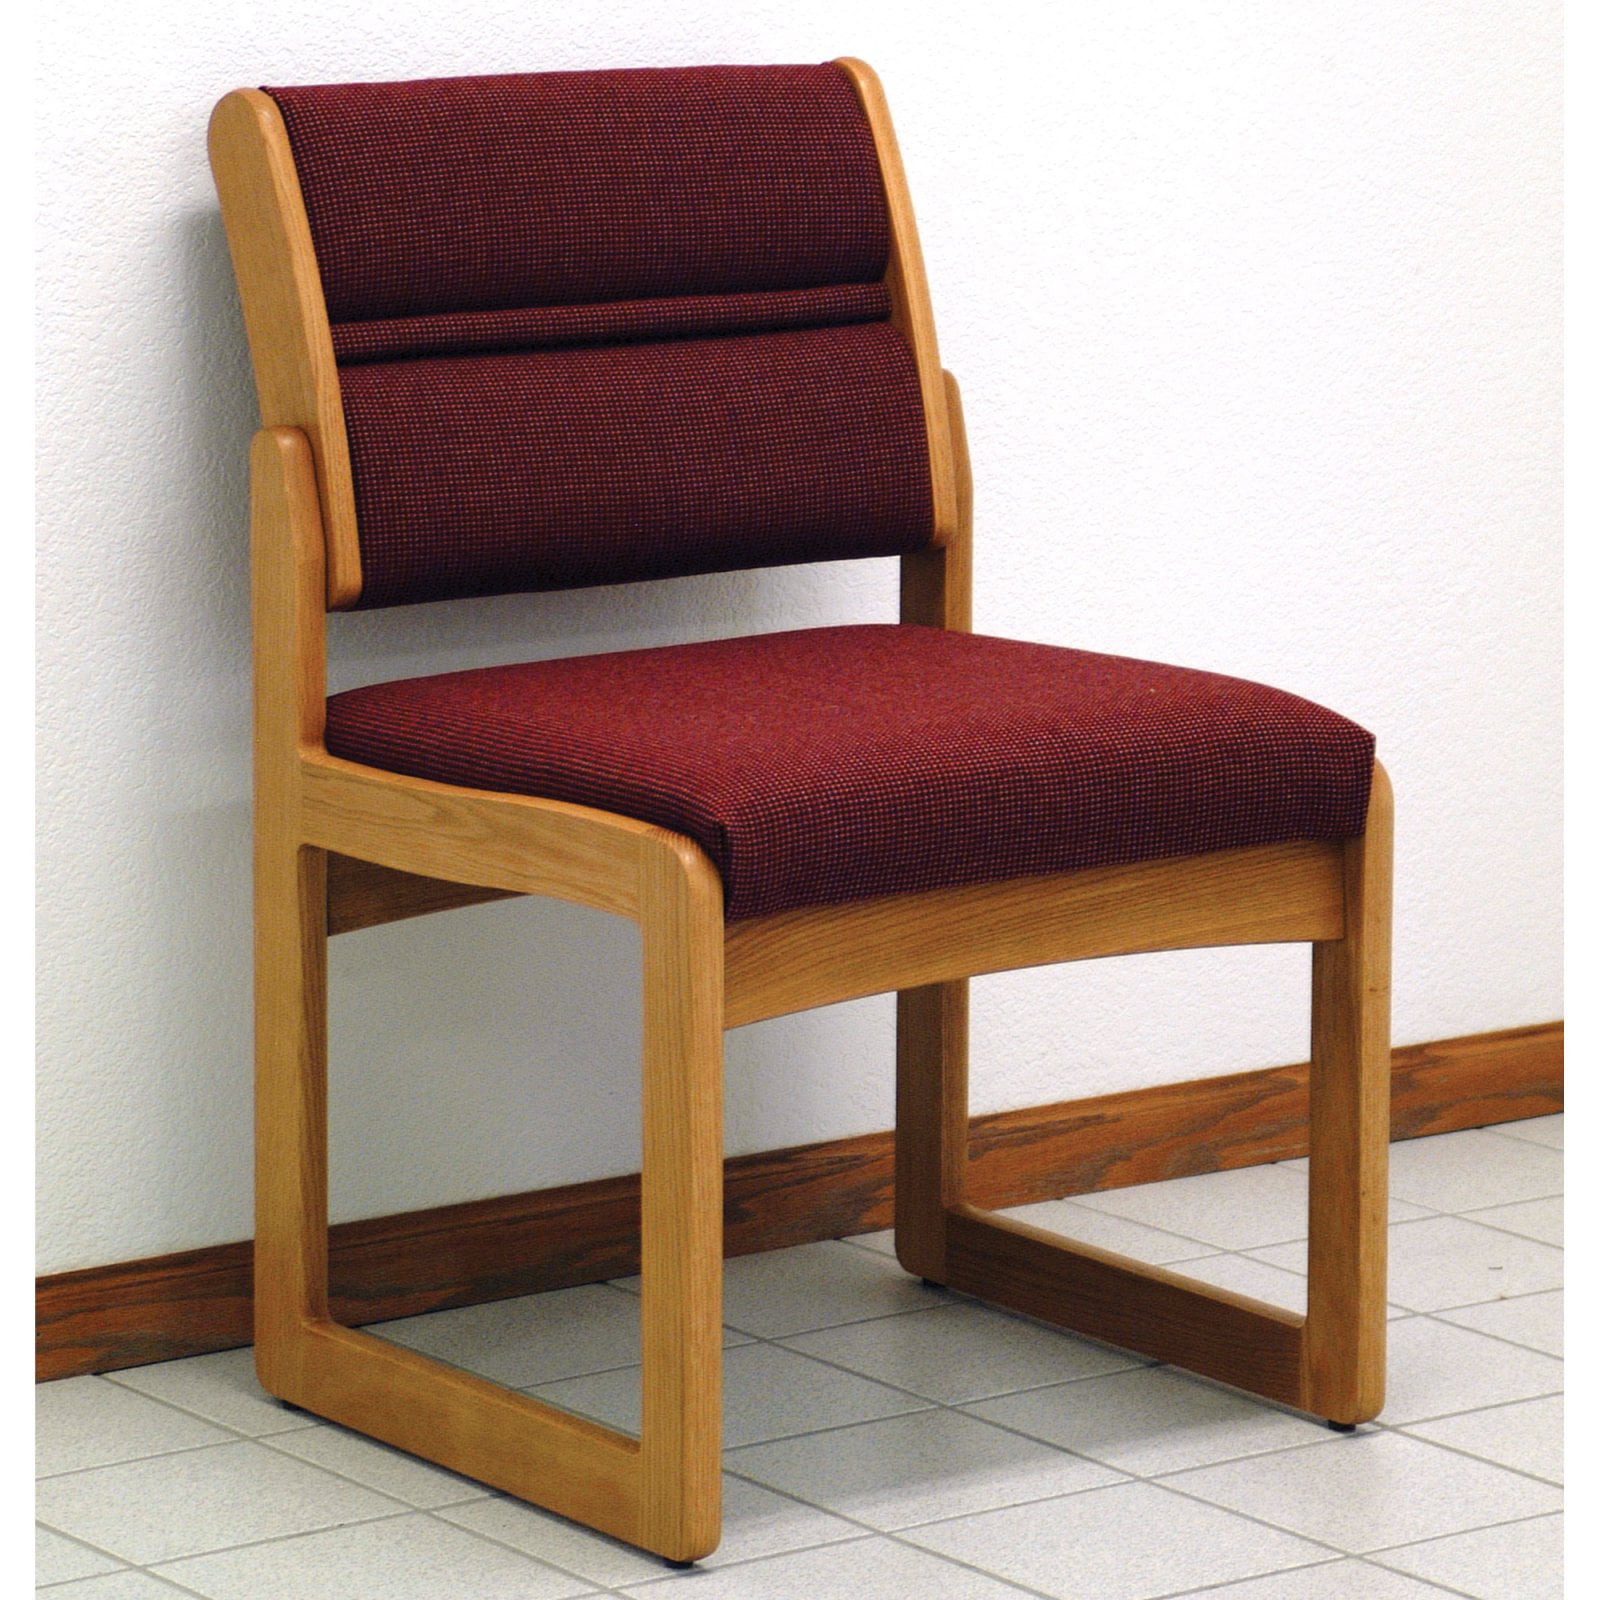 Solid Wood Furniture Chairs